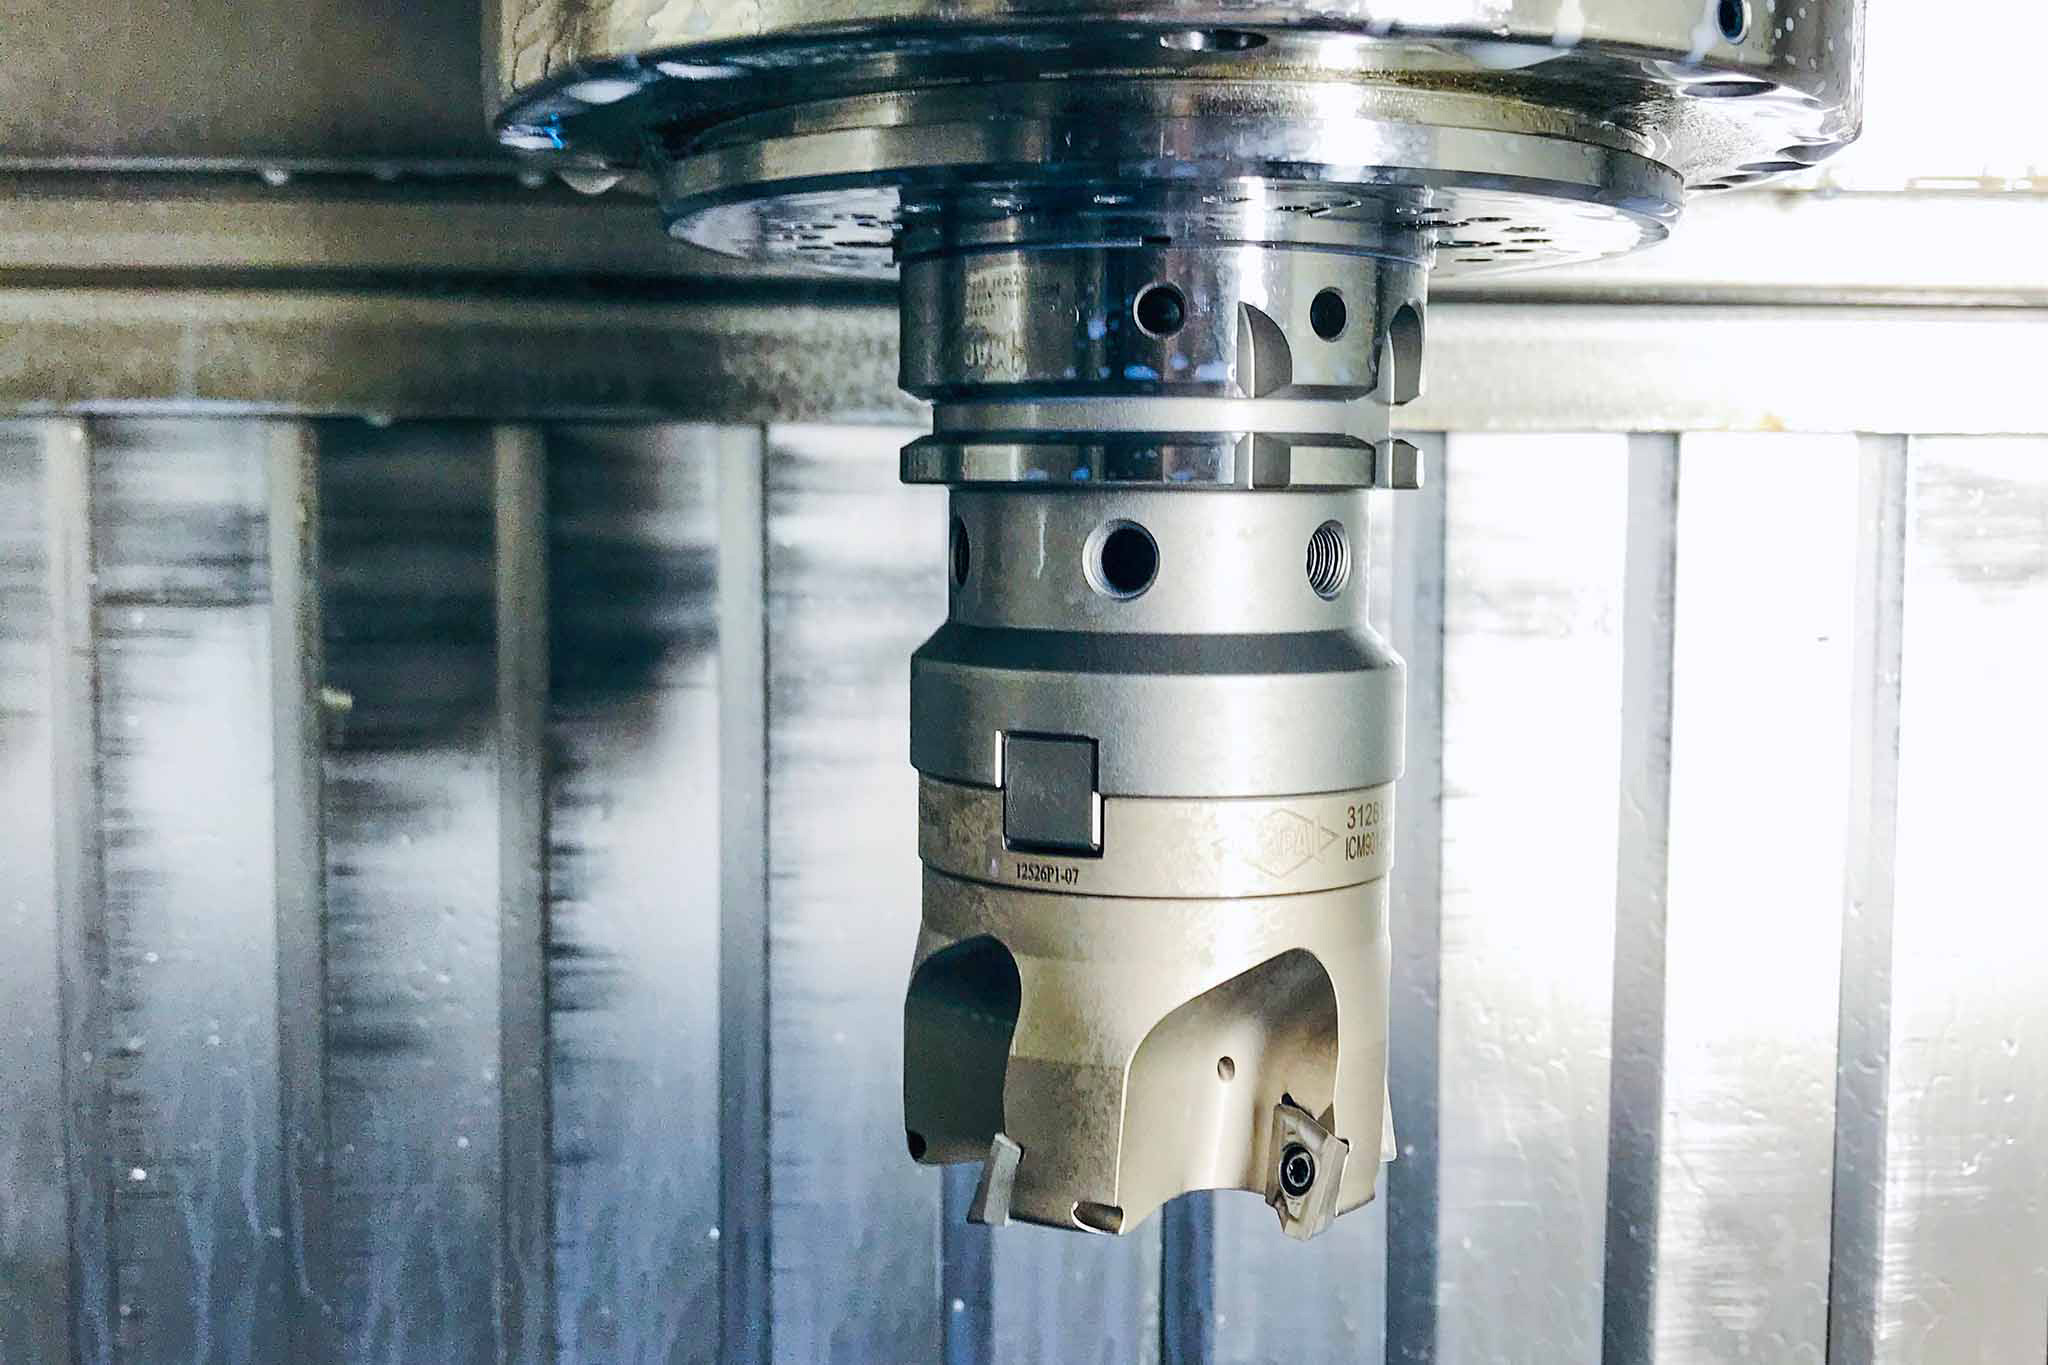 The picture shows an indexable insert milling cutter clamped in the machine.